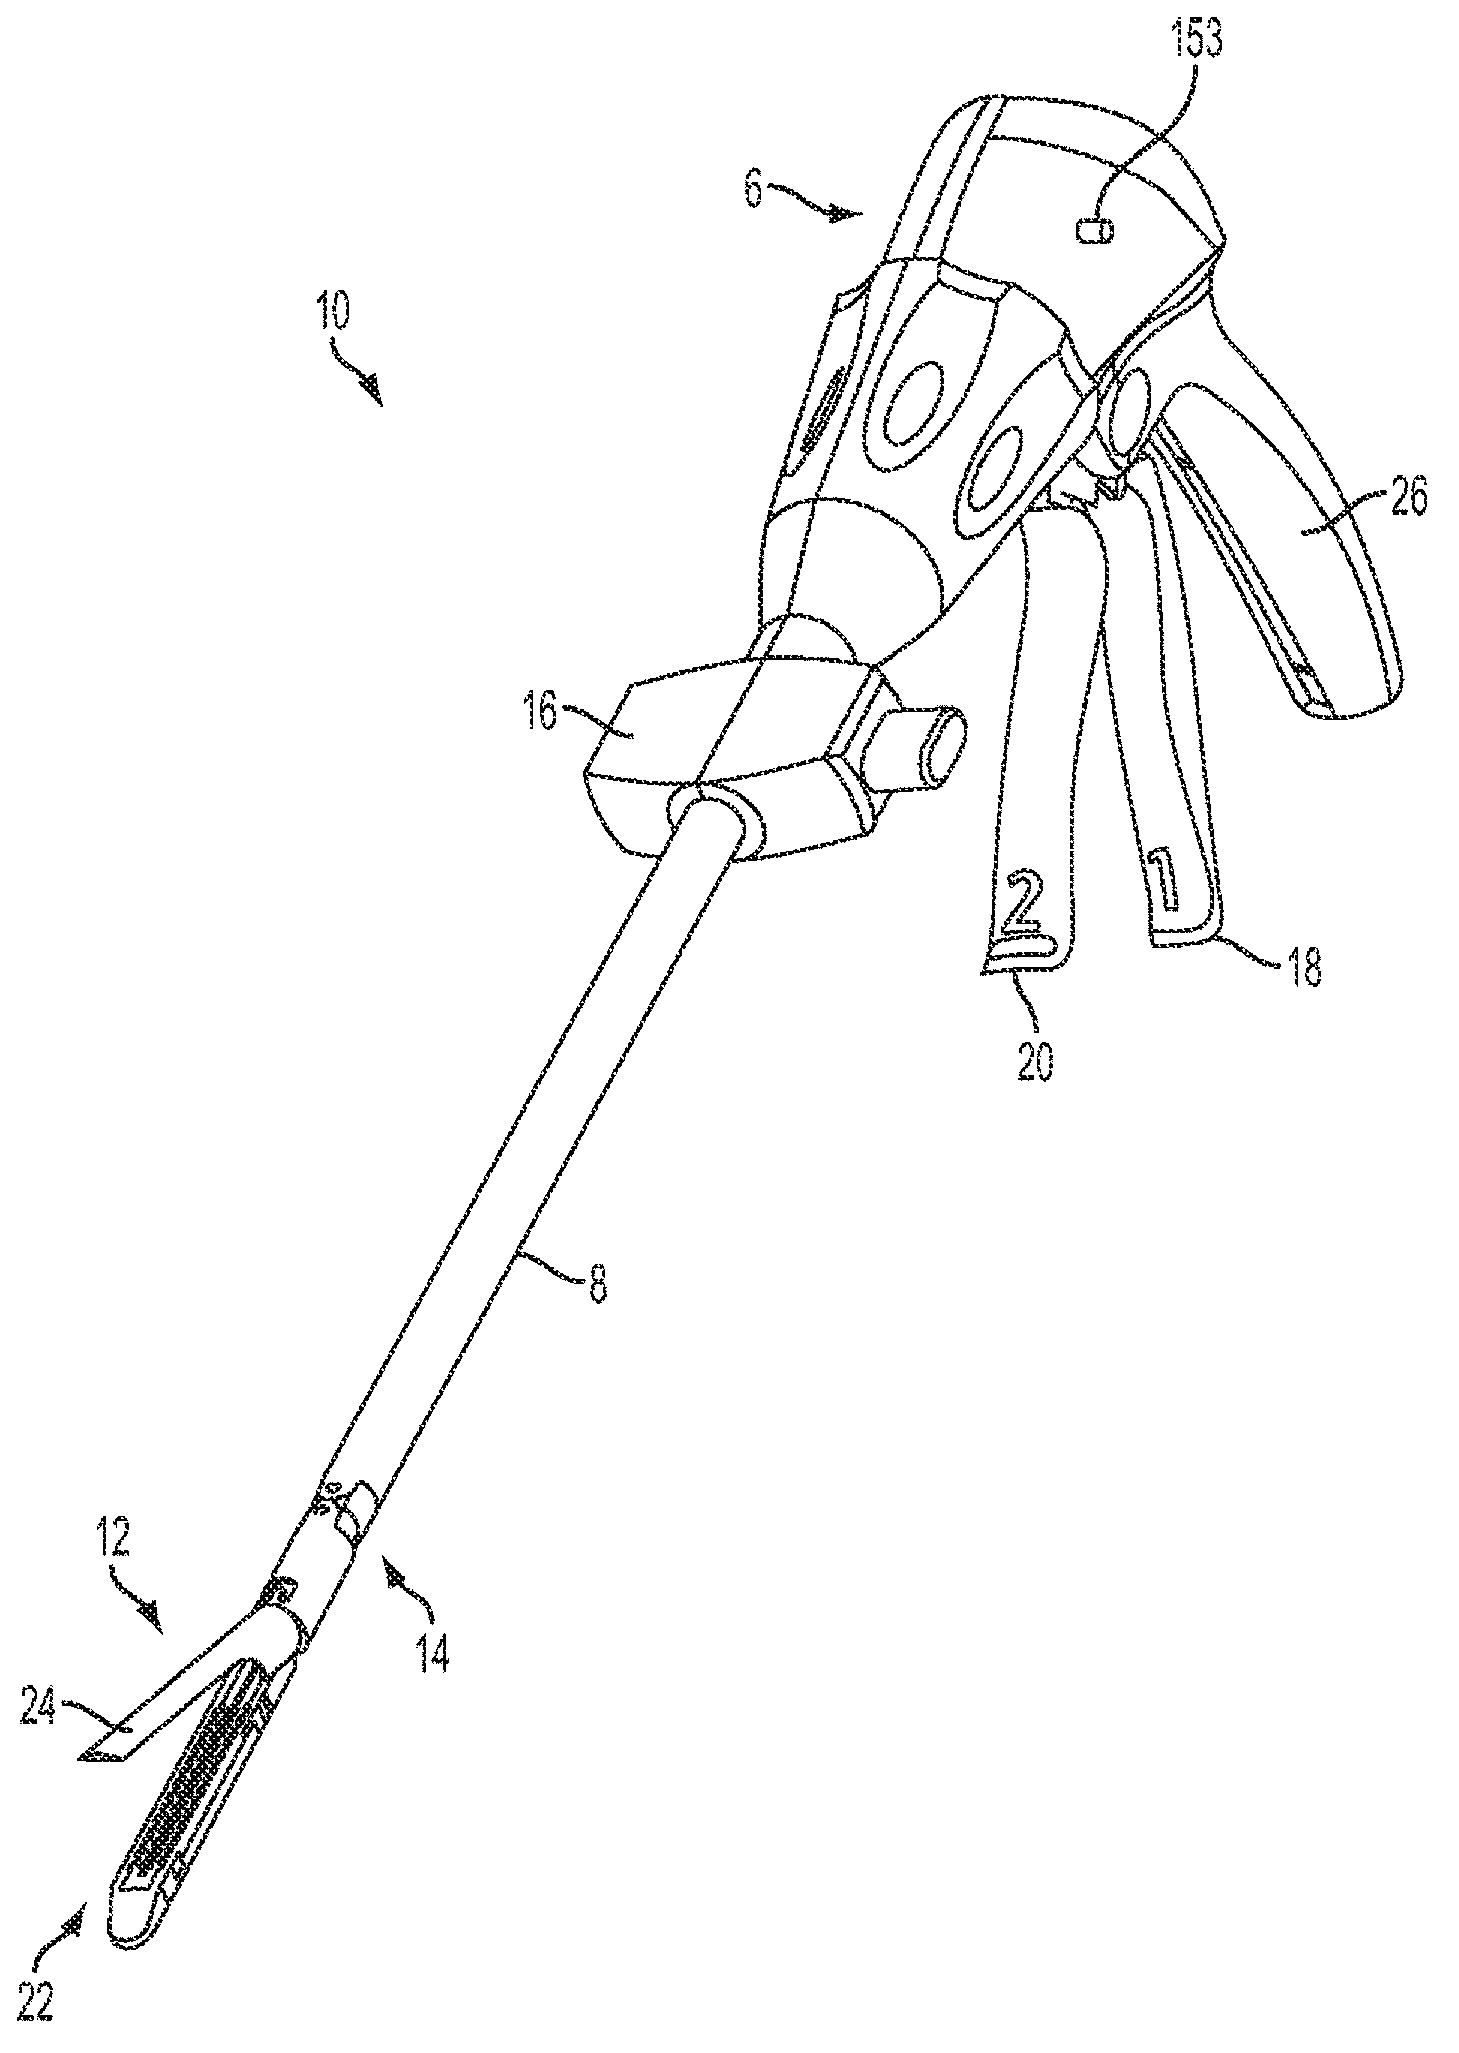 Motor driven surgical fastener device with mechanisms for adjusting a tissue gap within the end effector